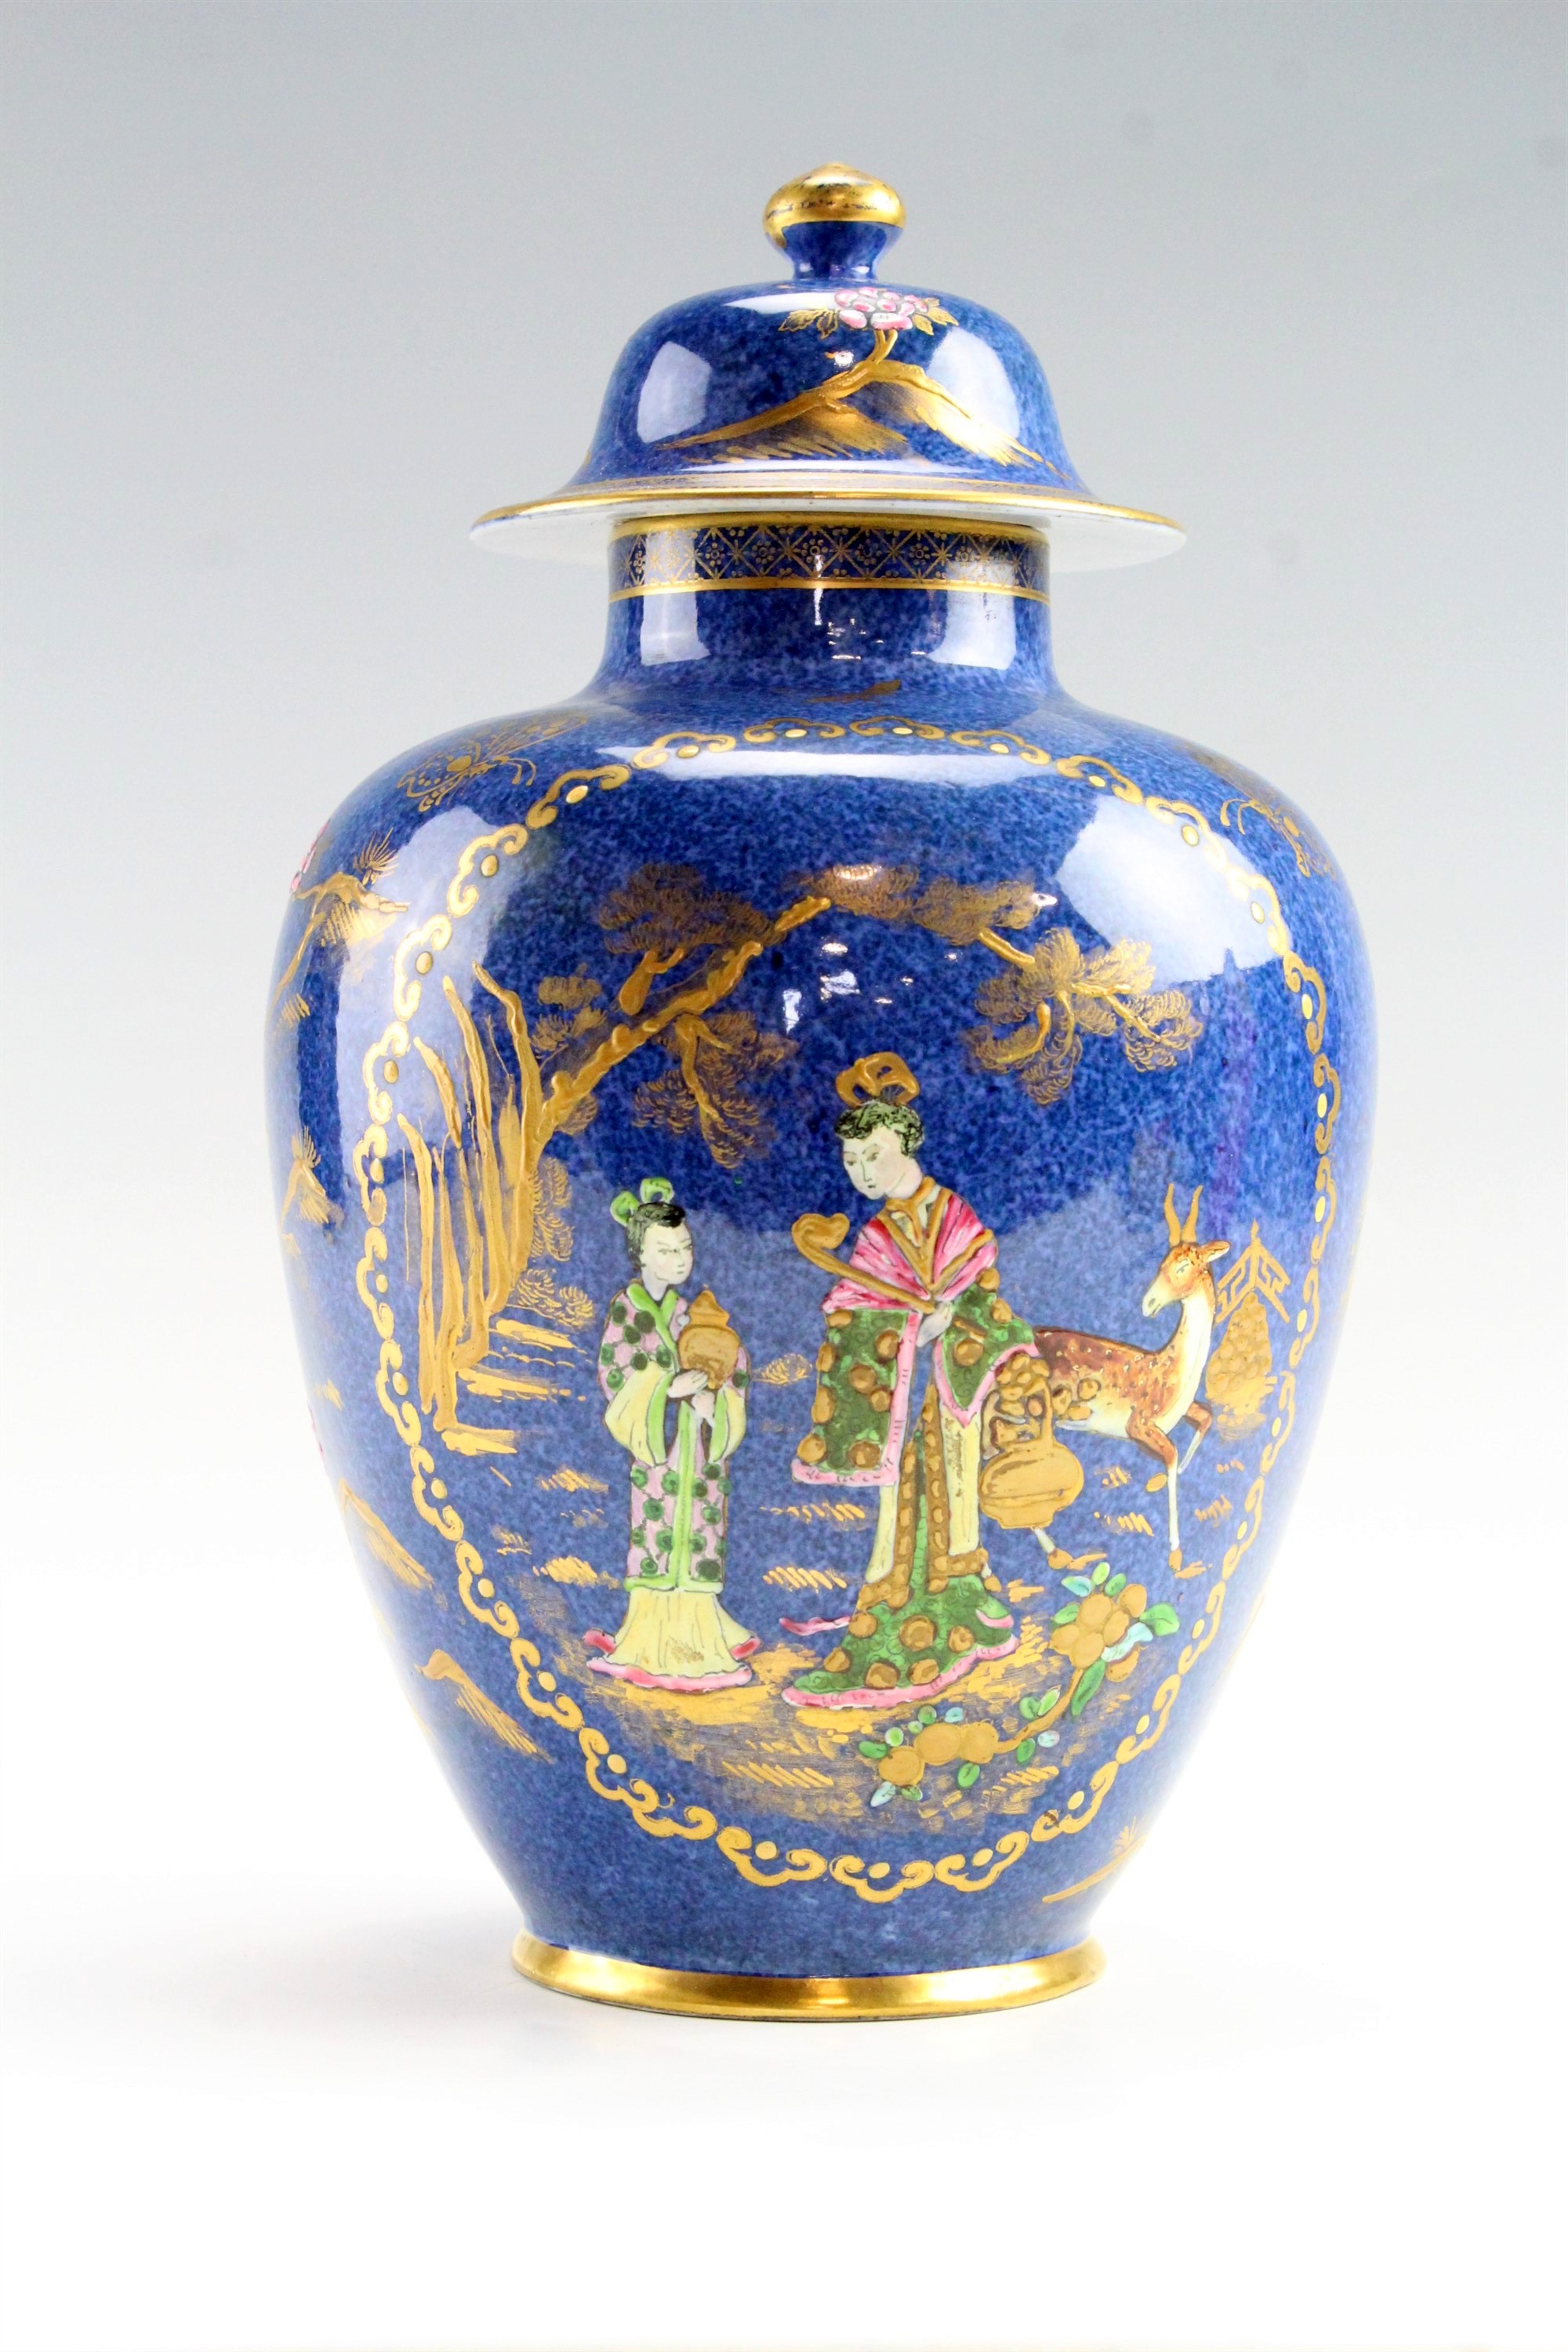 A 1920s New Chelsea Porcelain chinoiserie covered vase, 26 cm